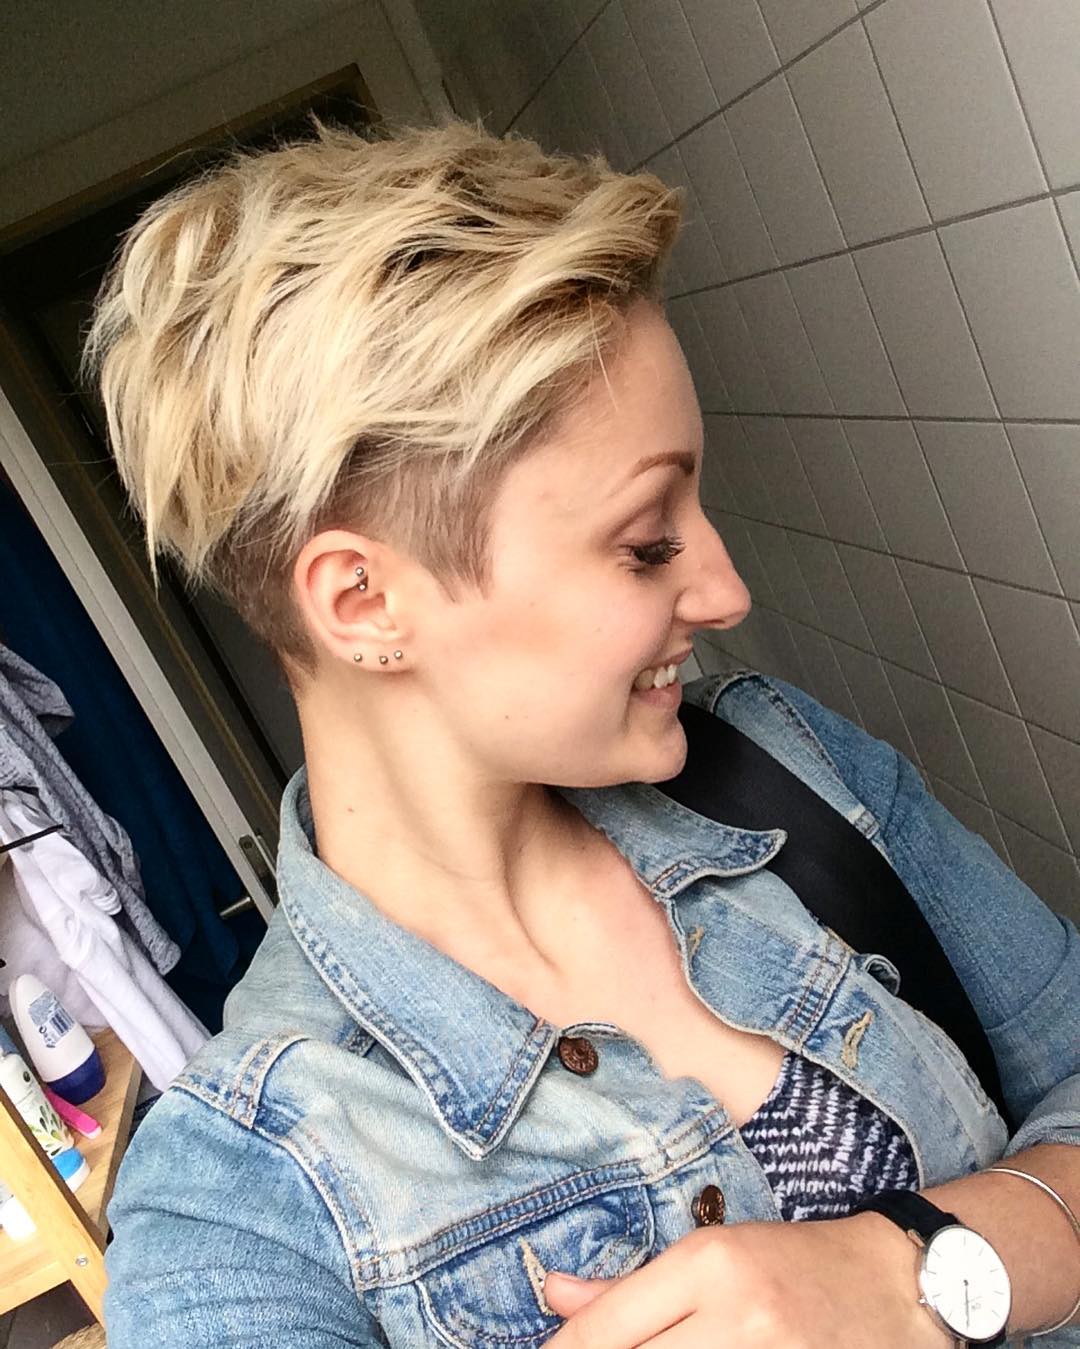 Trendiest Short Hairstyles for Women, Easy Pixie Haircut Trends